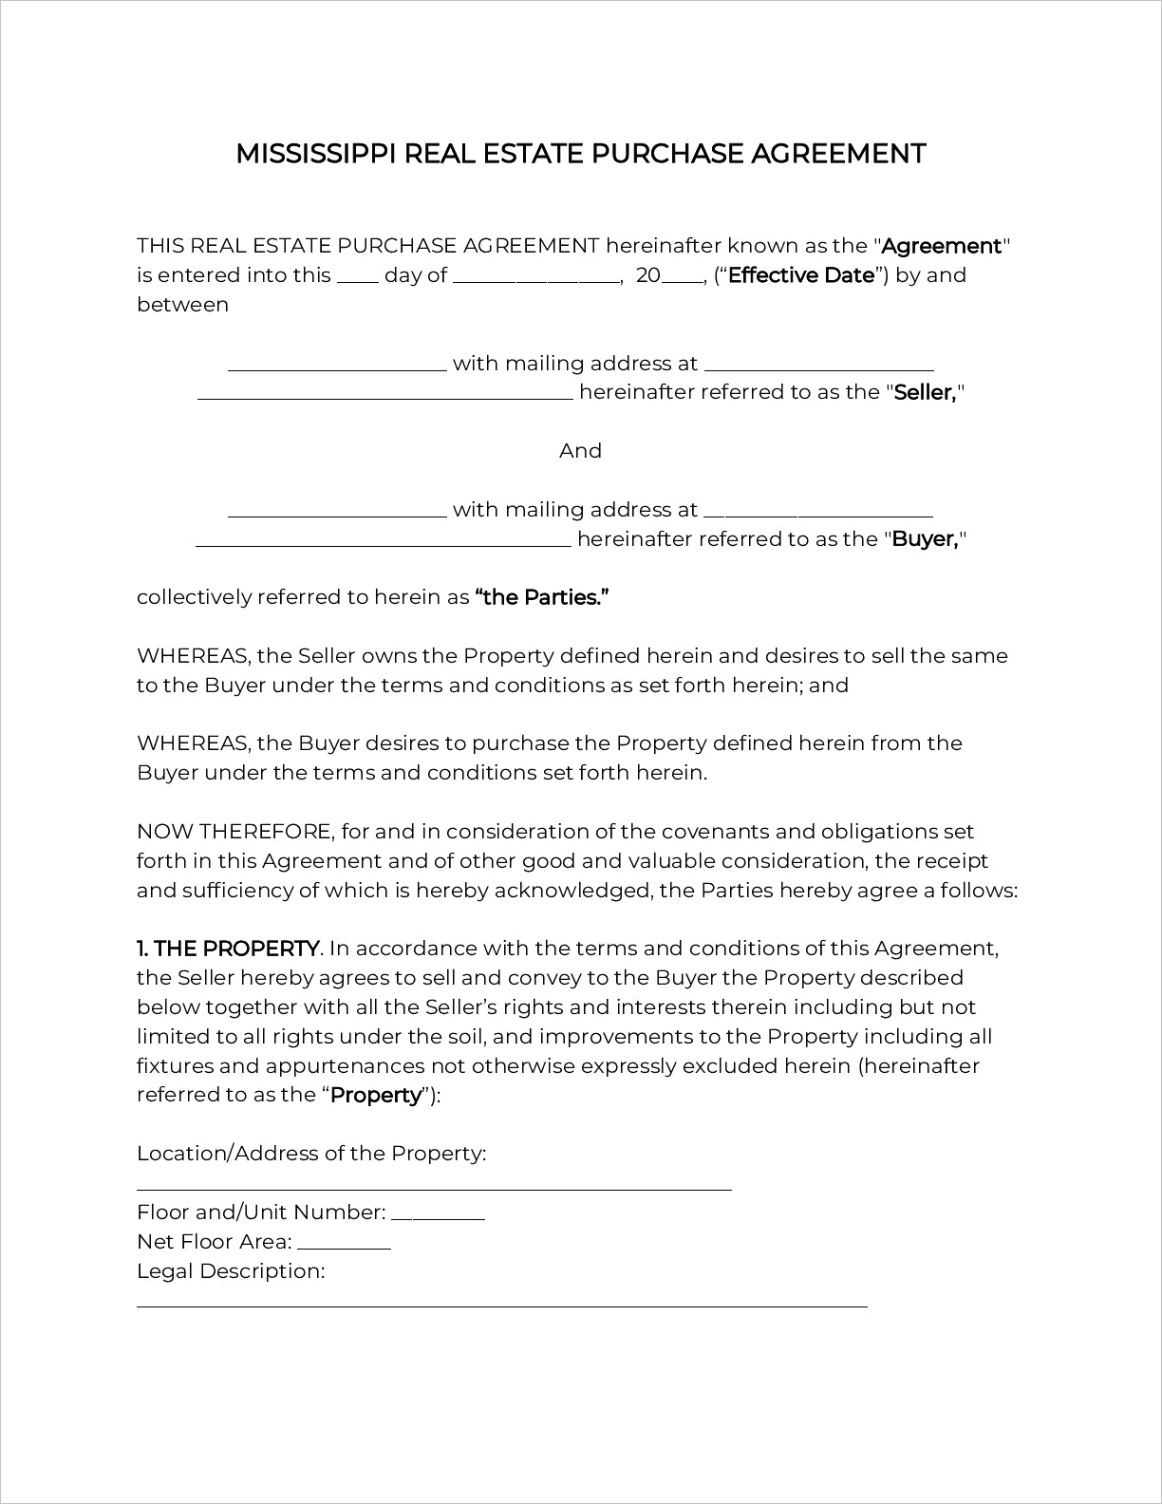 mississippi real estate purchase agreement